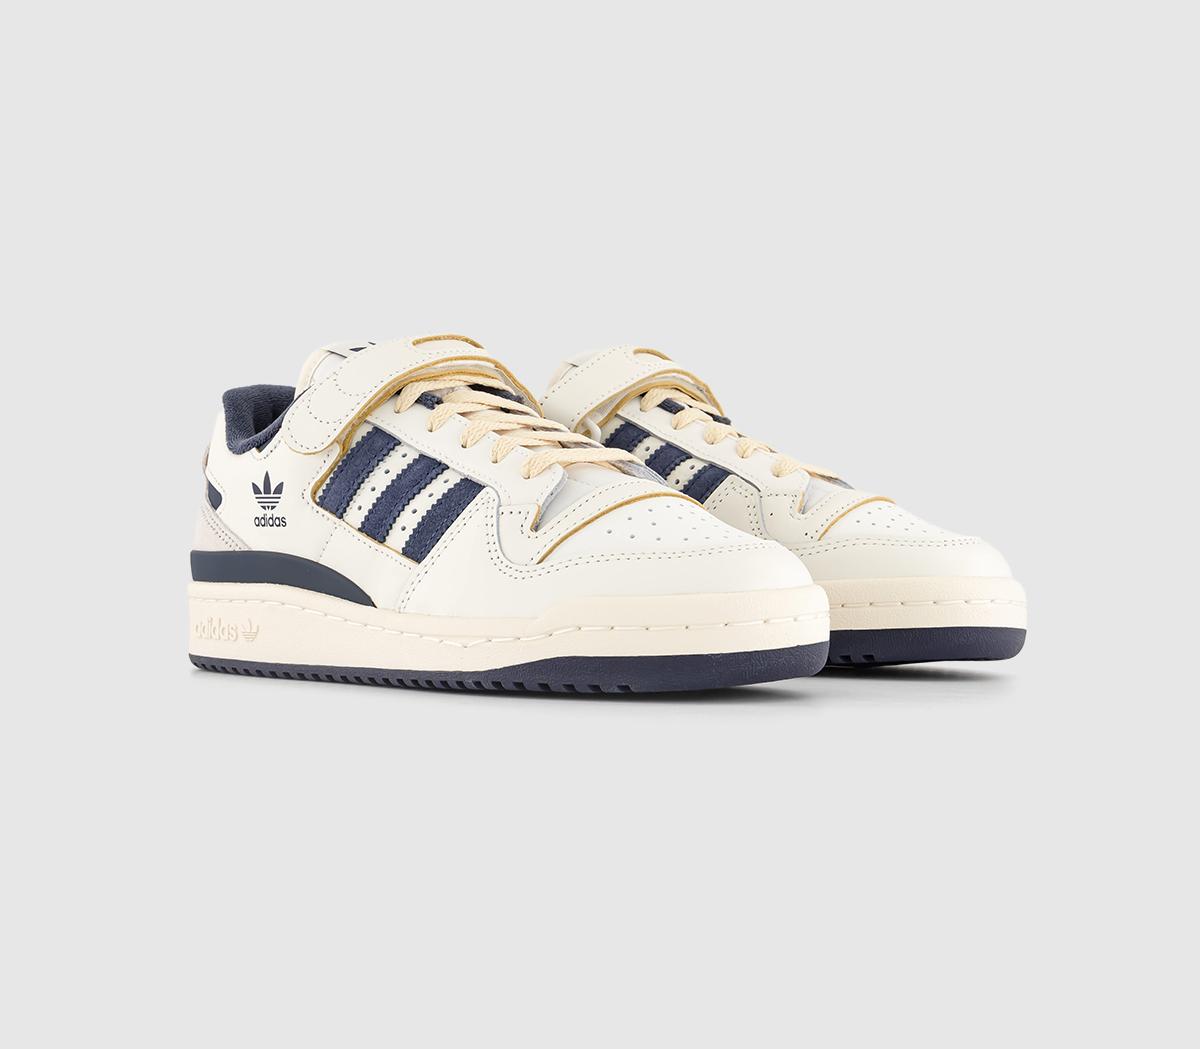 Adidas Womens Forum 84 Low Trainers Offwhite Shadow Navy Cream White, 10.5